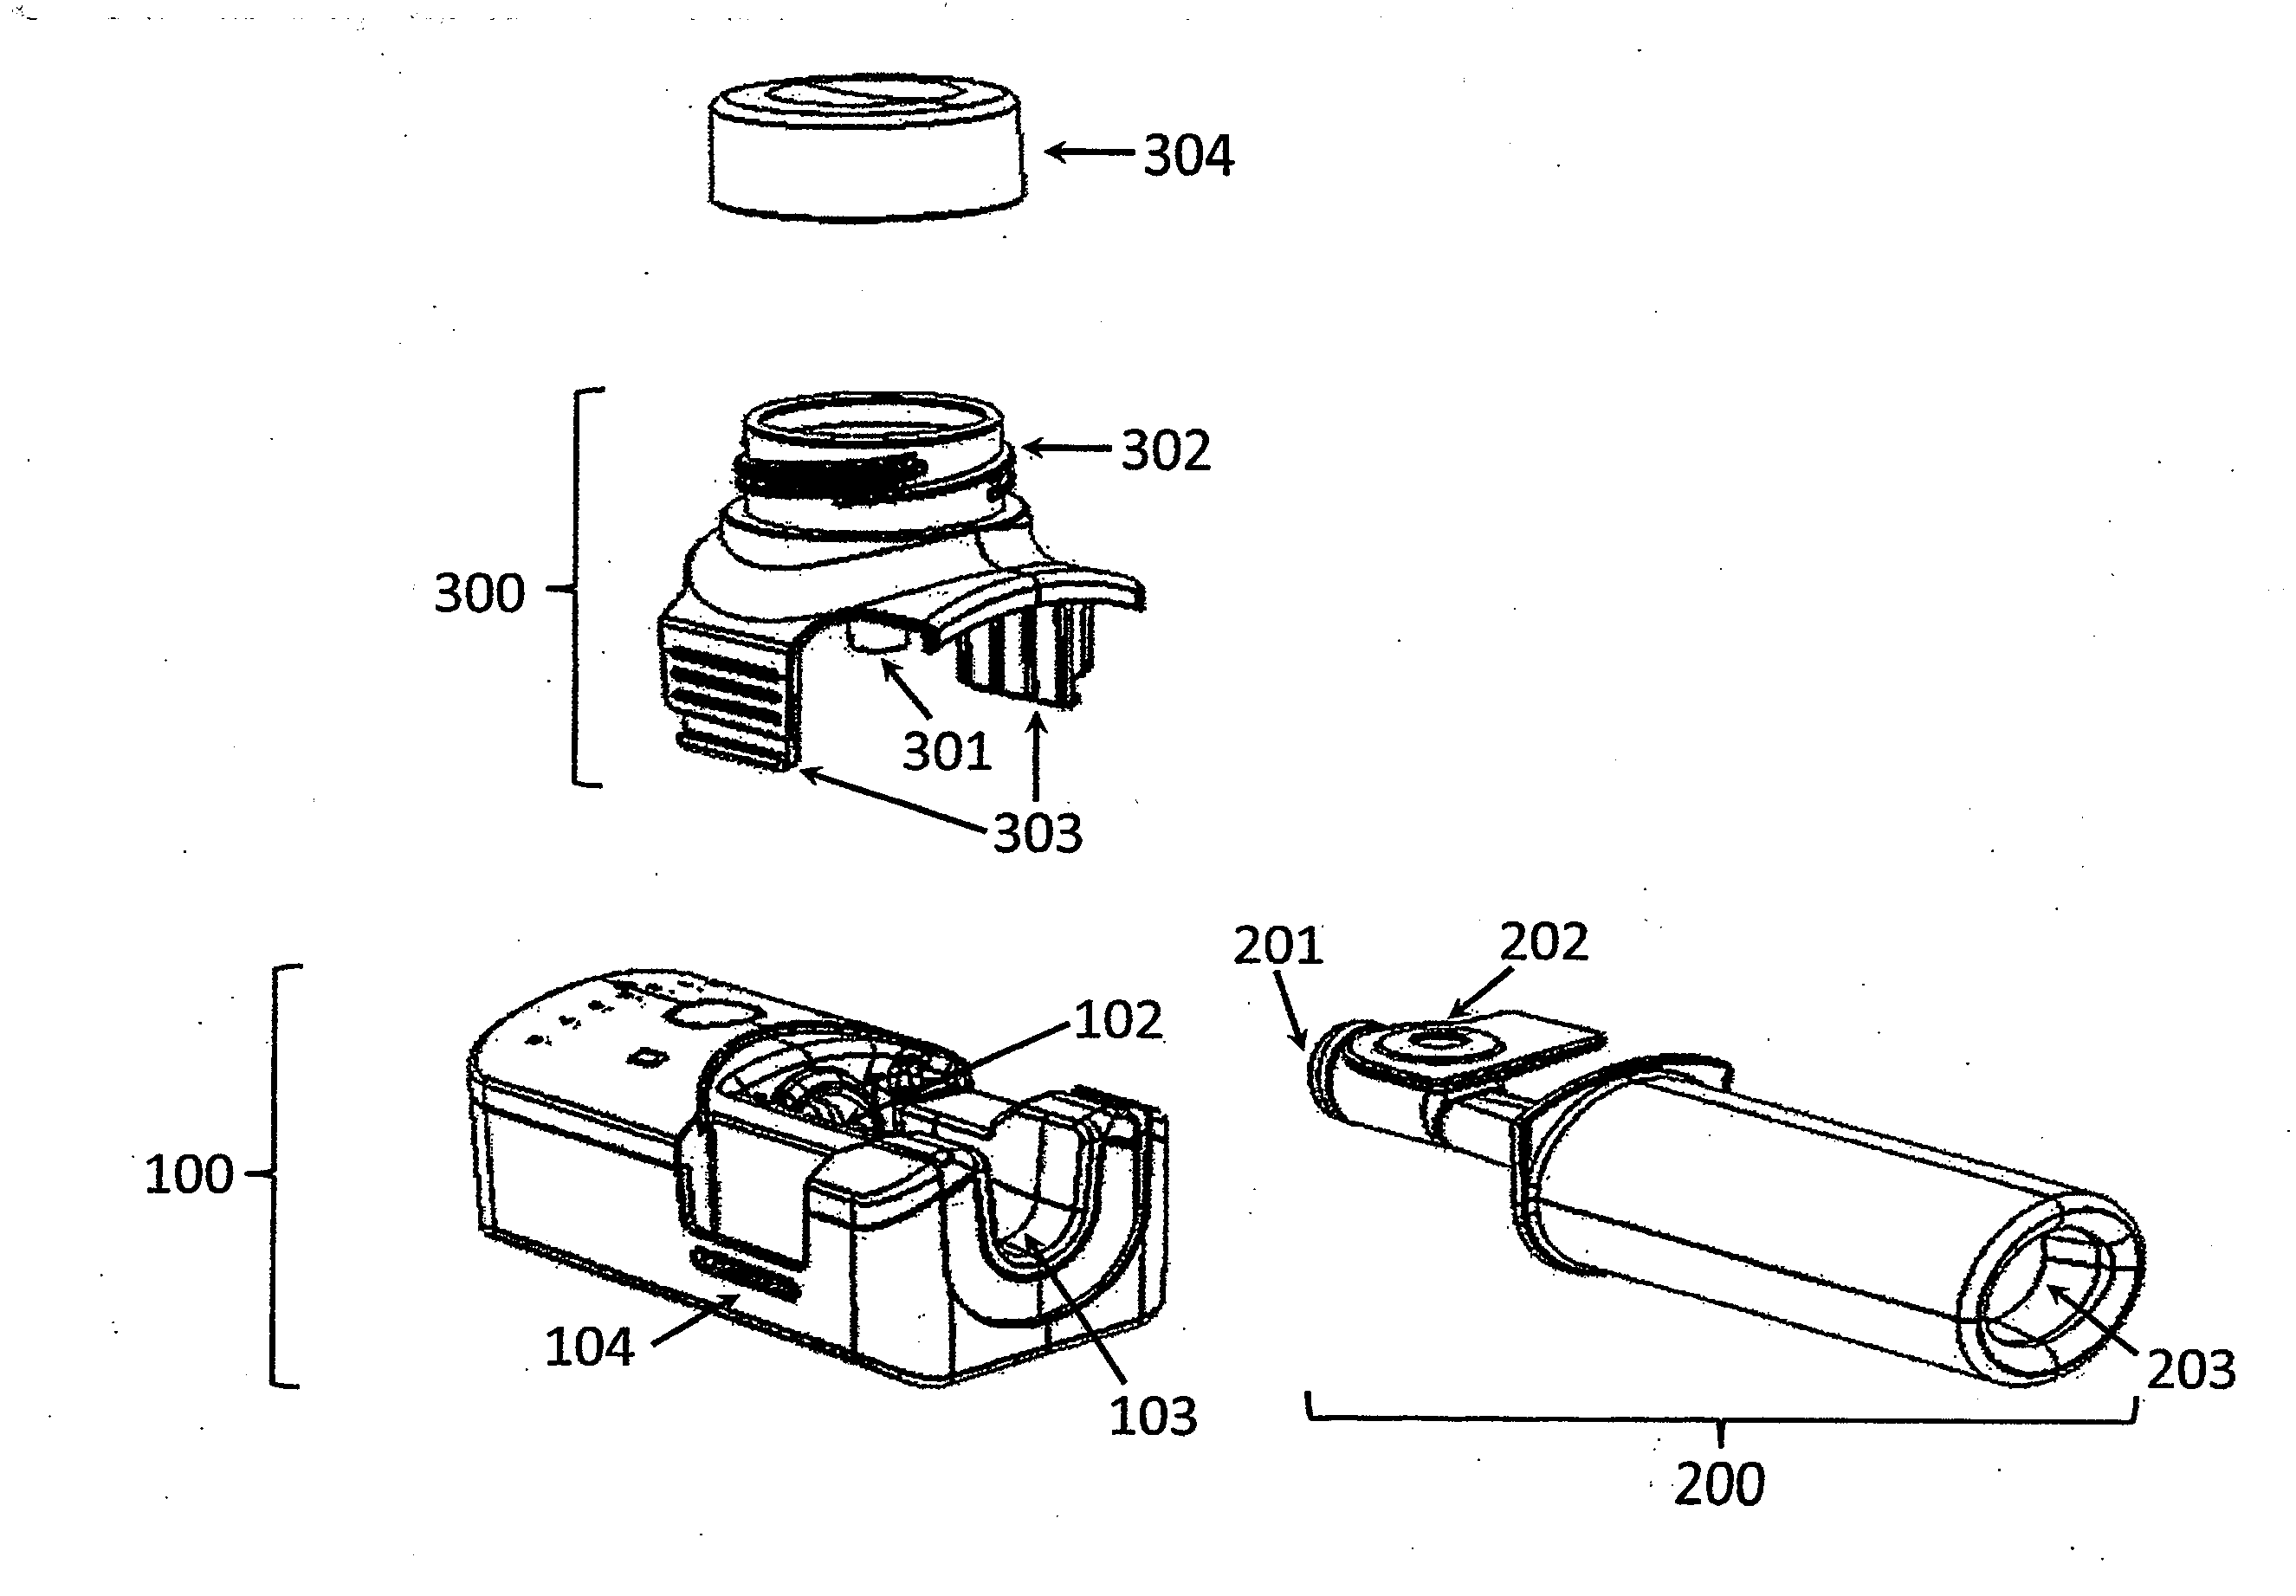 Inhalation device for use in aerosol therapy